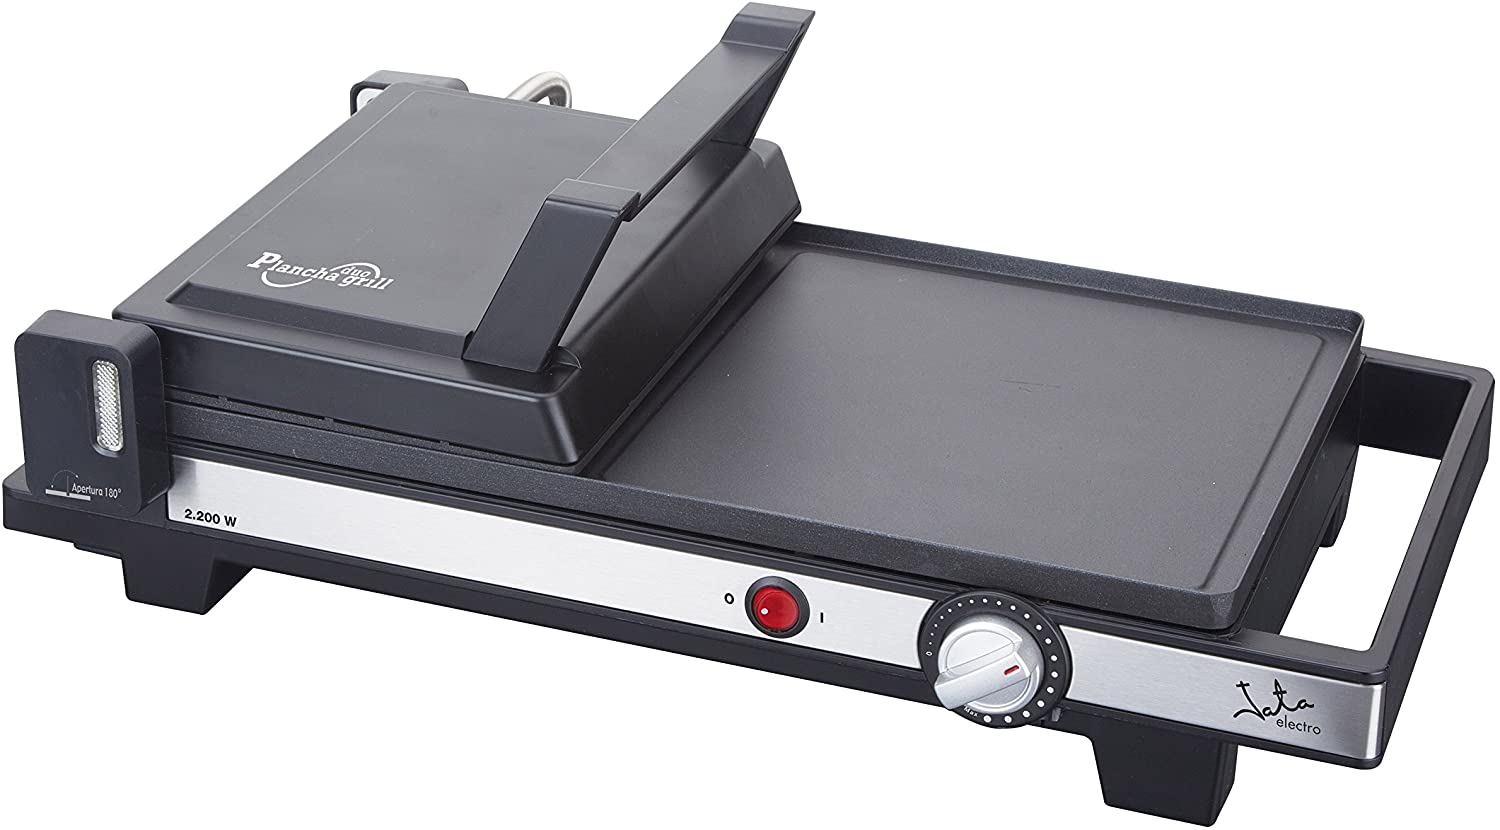 JATA GR269 Contact Grill Electric Grill – Rectangular Table – Black Heat Proof Lacquer)